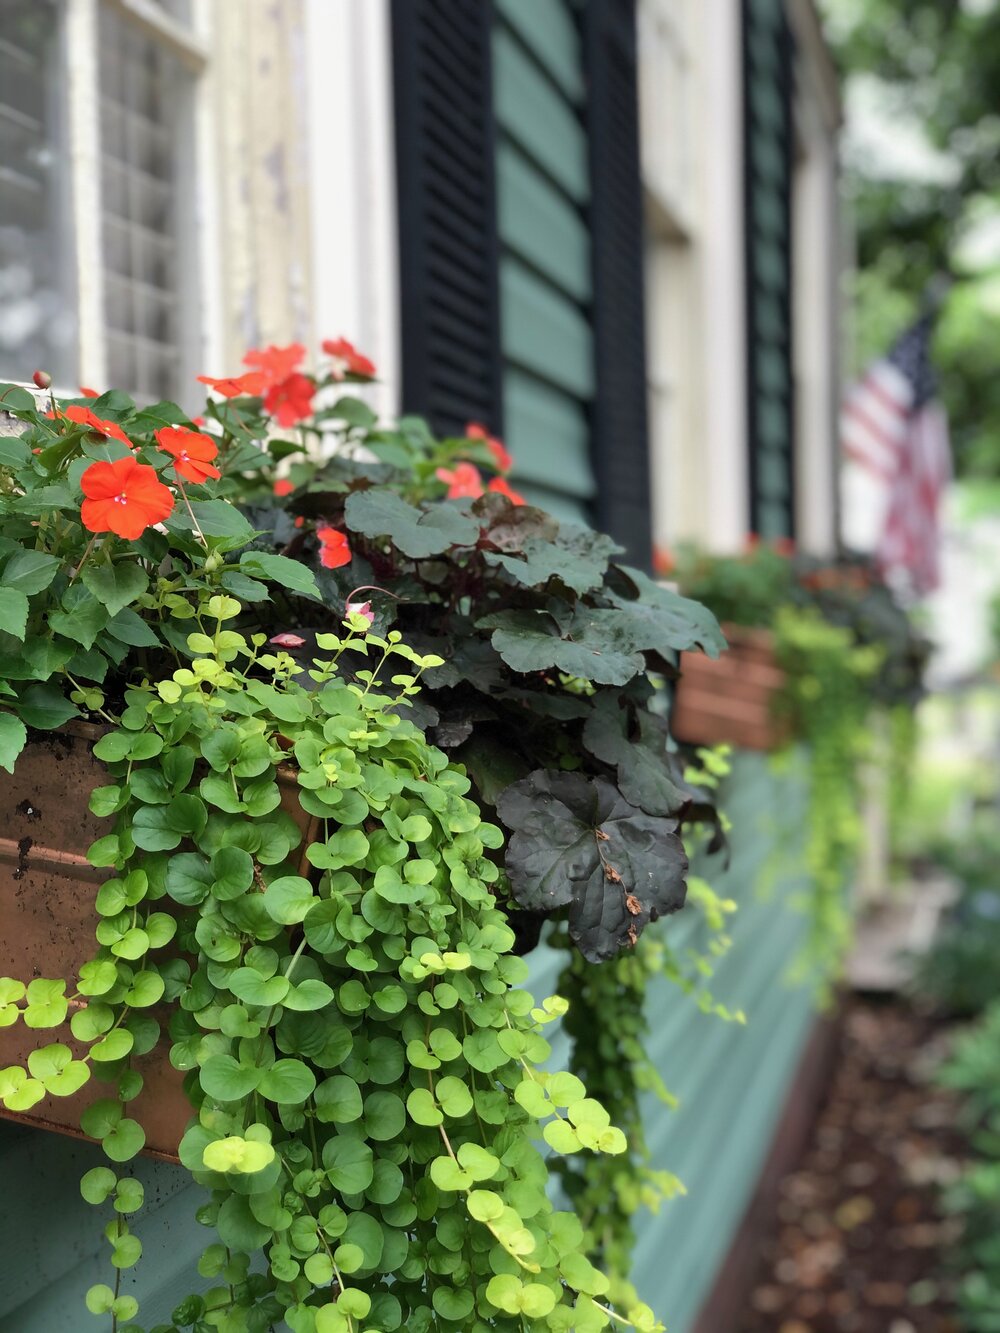 Our current flower boxes showcase Creeping Jenny, Impatiens, and Coral Bells in the middle.